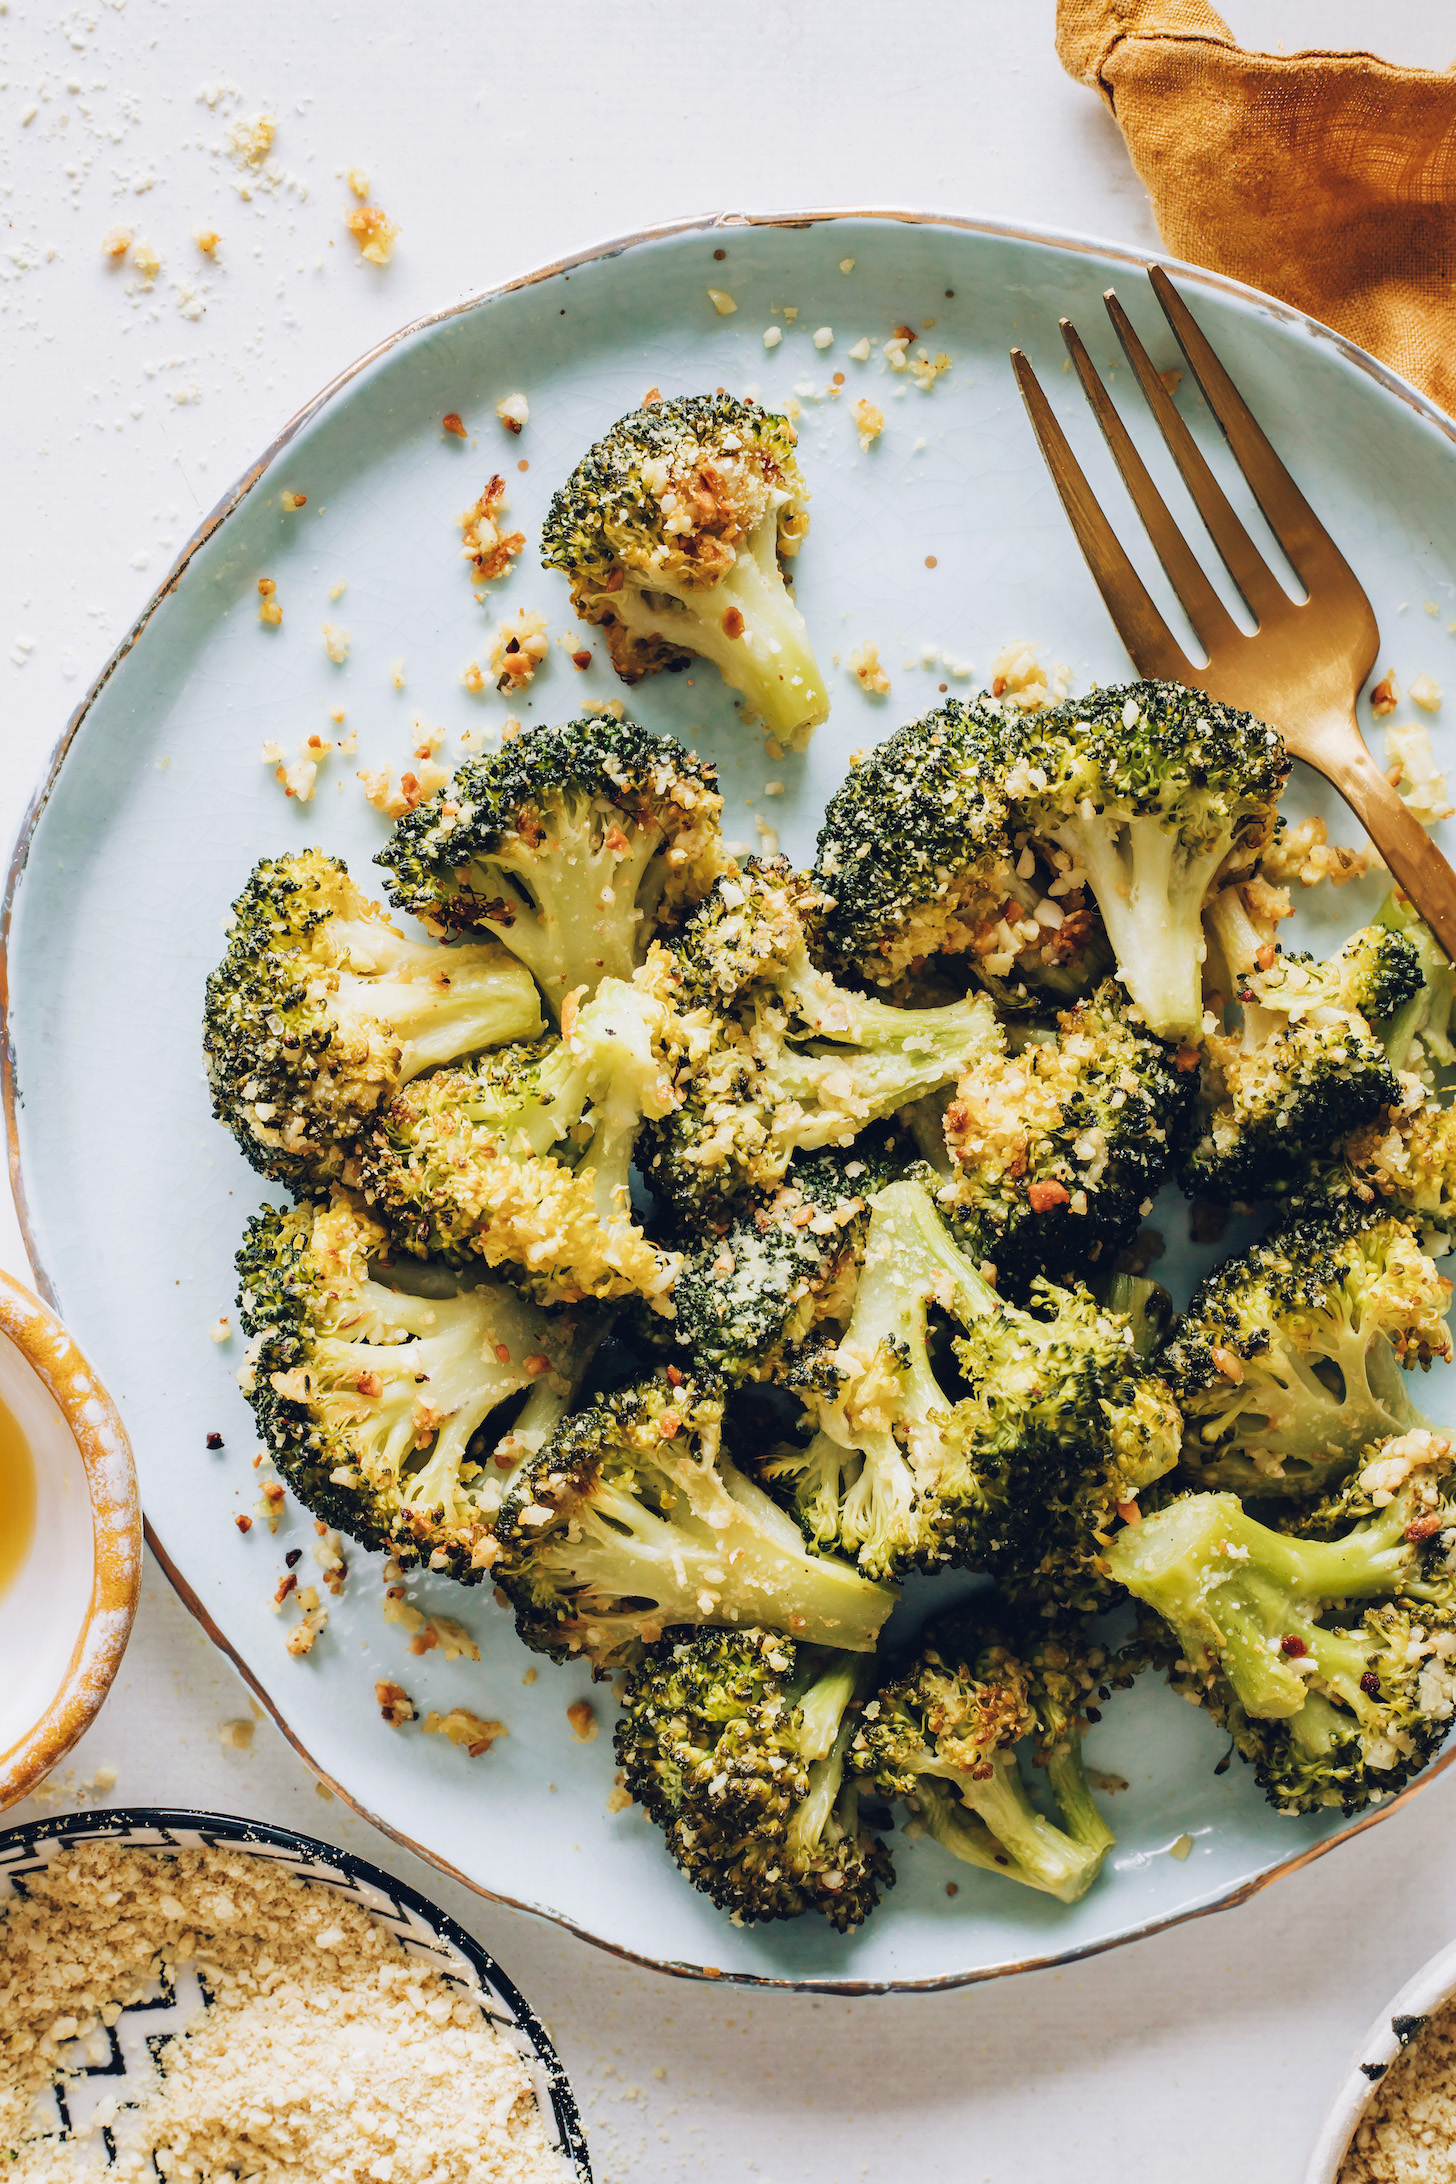 Plate of perfect roasted broccoli with vegan parmesan